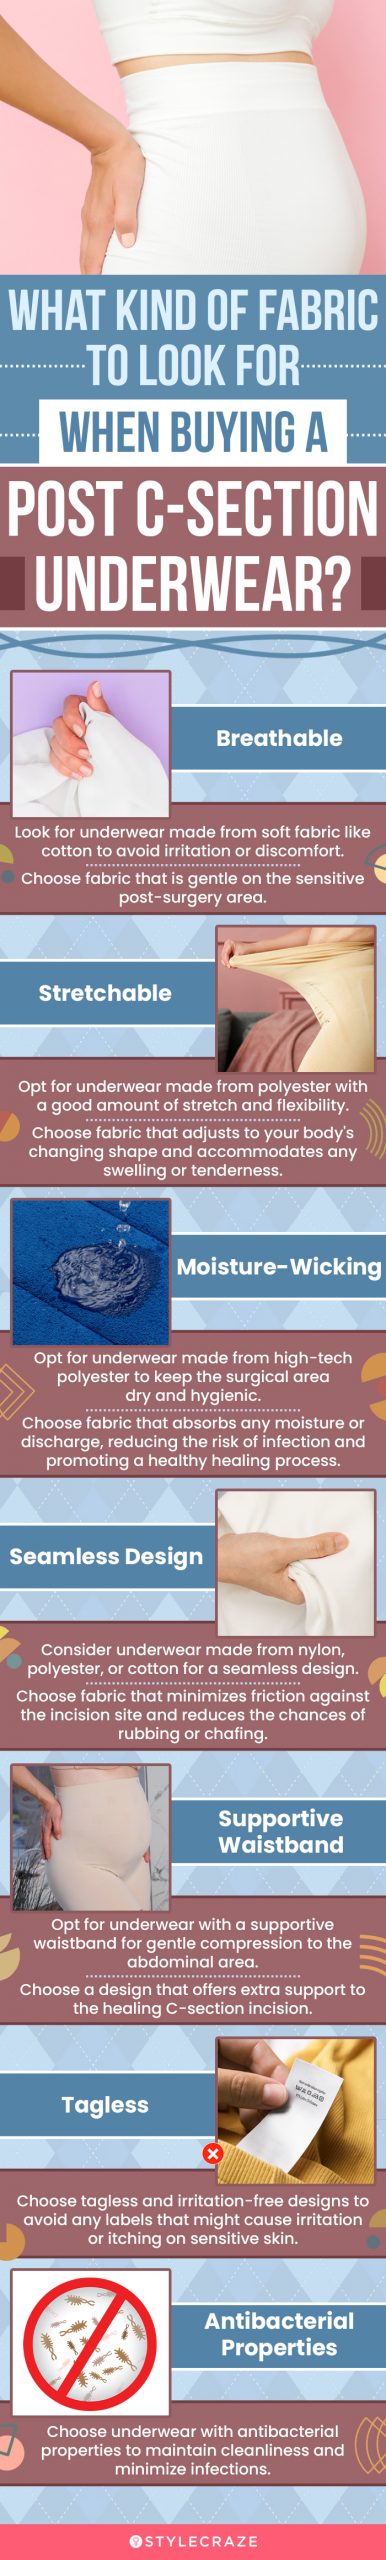 What Kind Of Fabric To Look For When Buying A Post C-Section Underwear? (infographic)